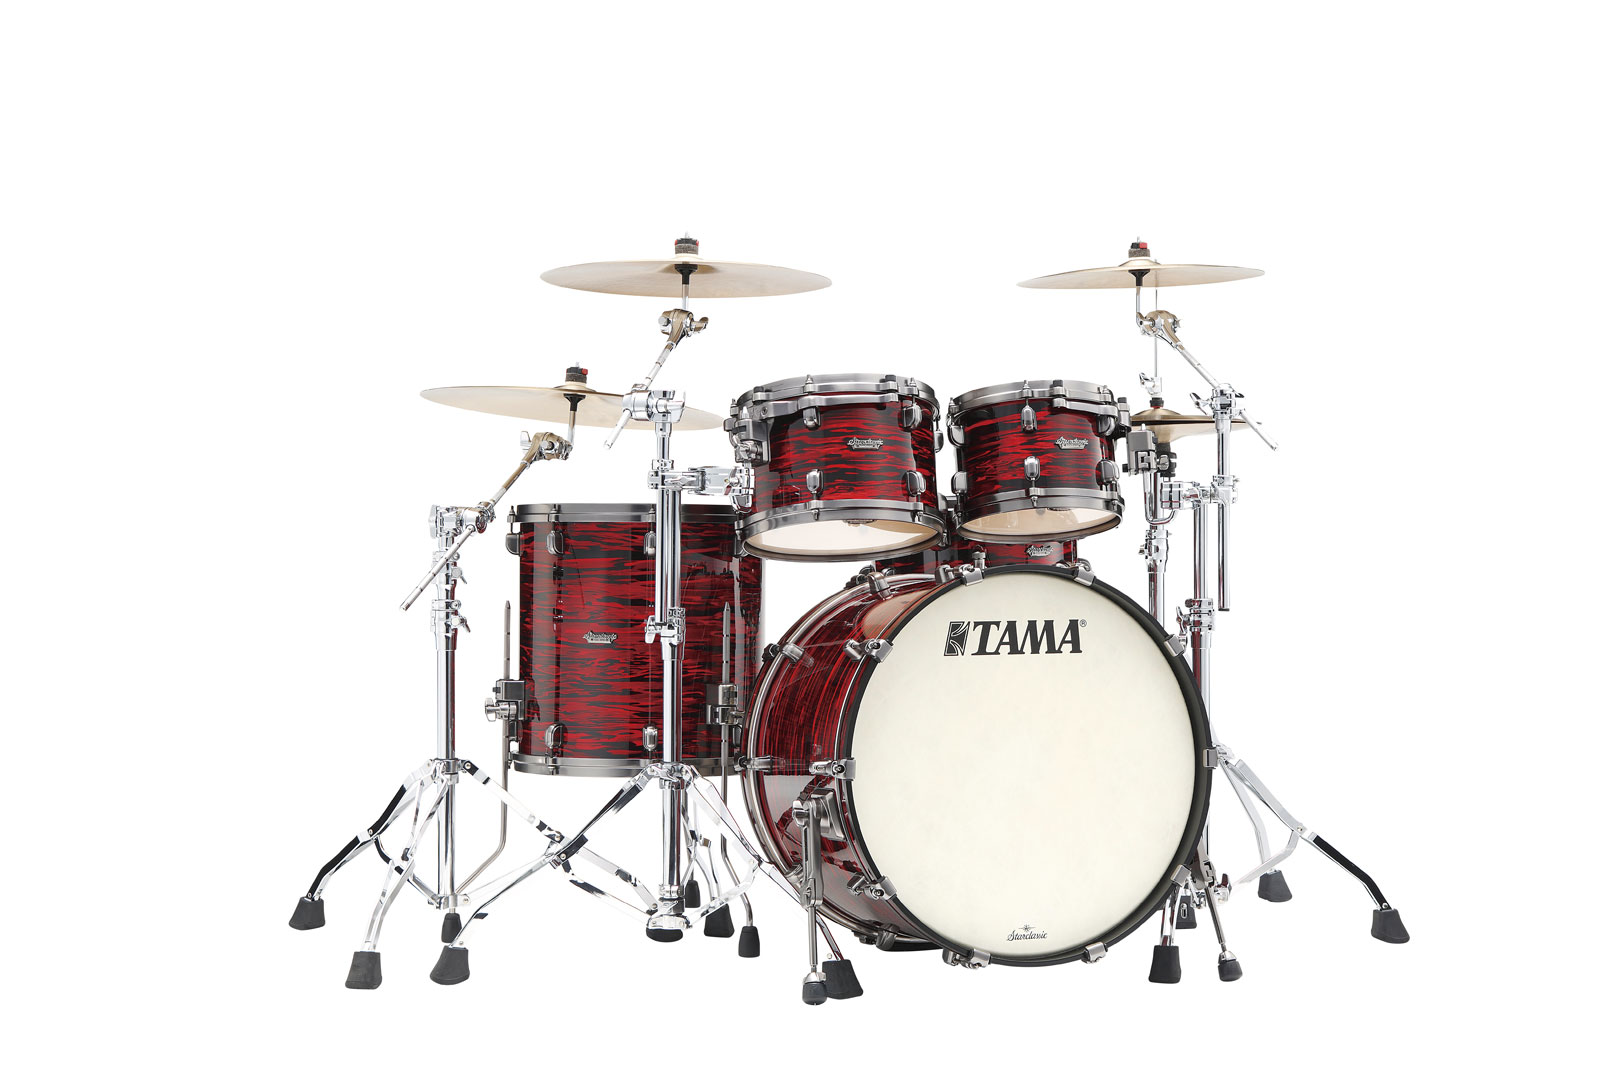 TAMA STARCLASSIC MAPLE STAGE 22 DRUM KIT, SMOKED BLACK NICKEL SHELL HARDWARE RED OYSTER